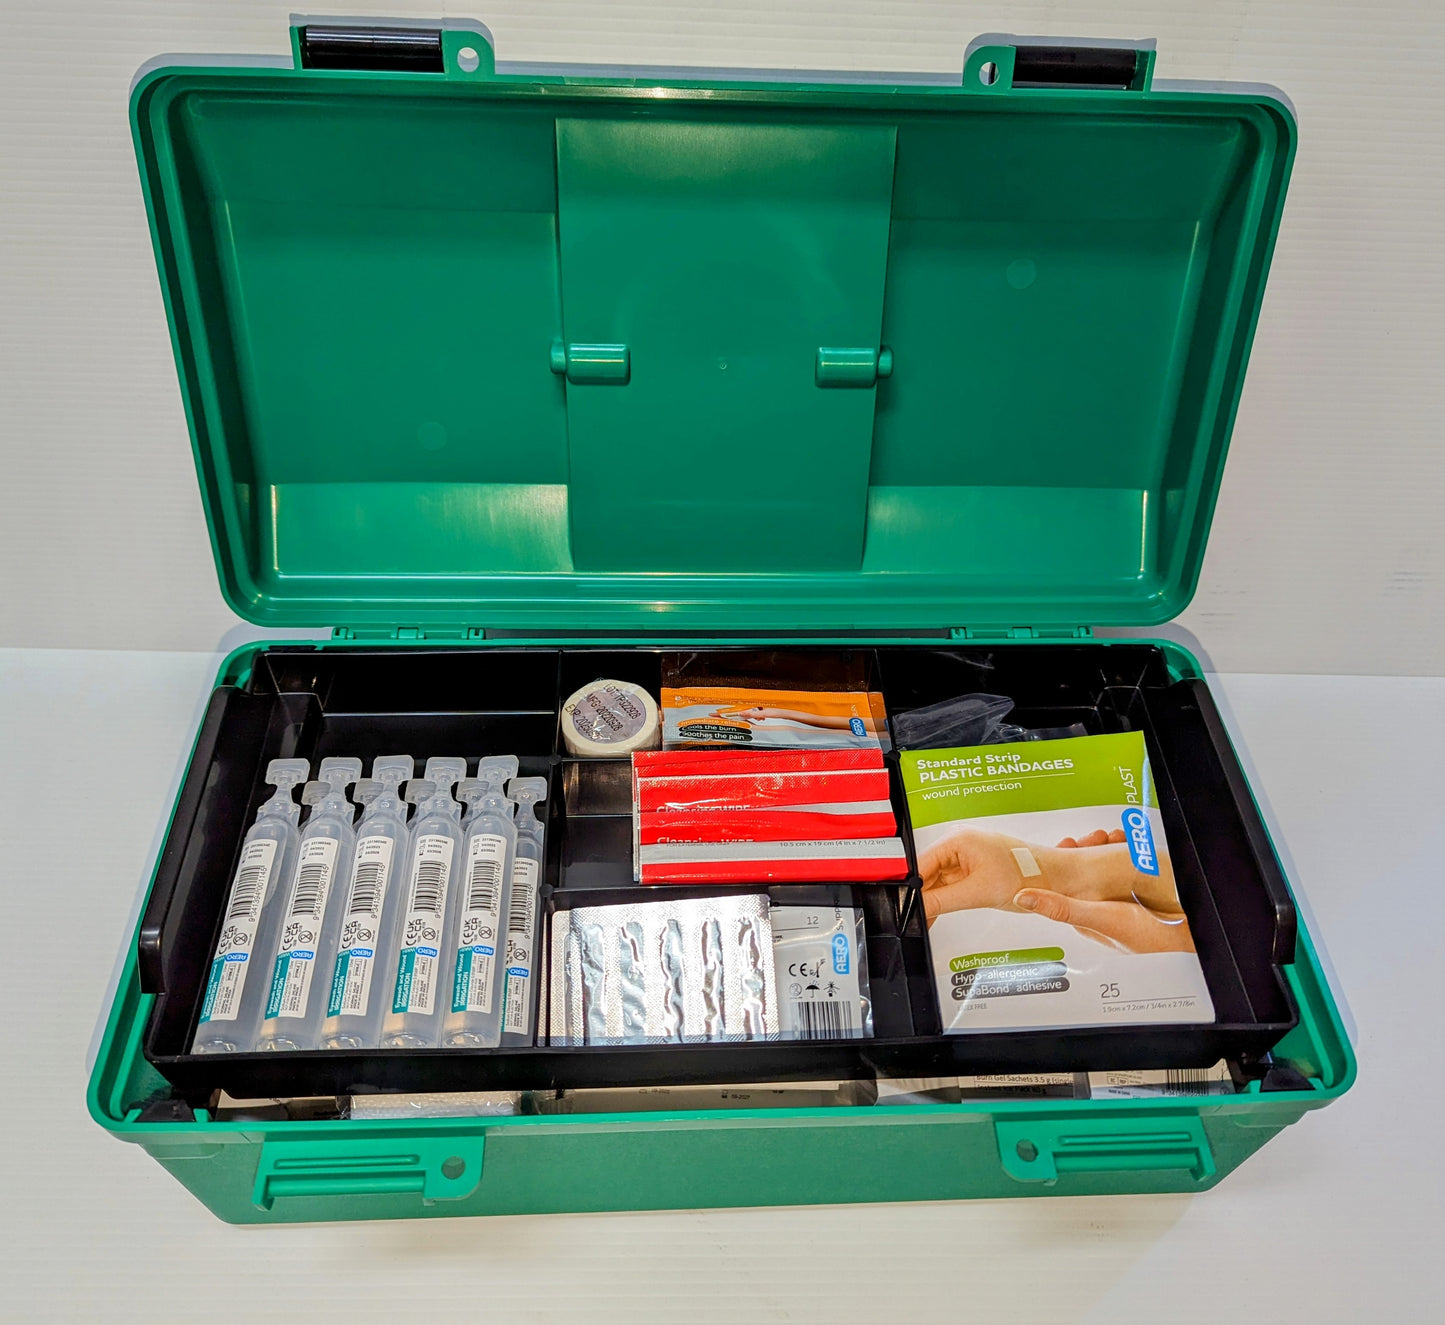 First Aid Tacklebox Workplace Compliant 10 Person-Large